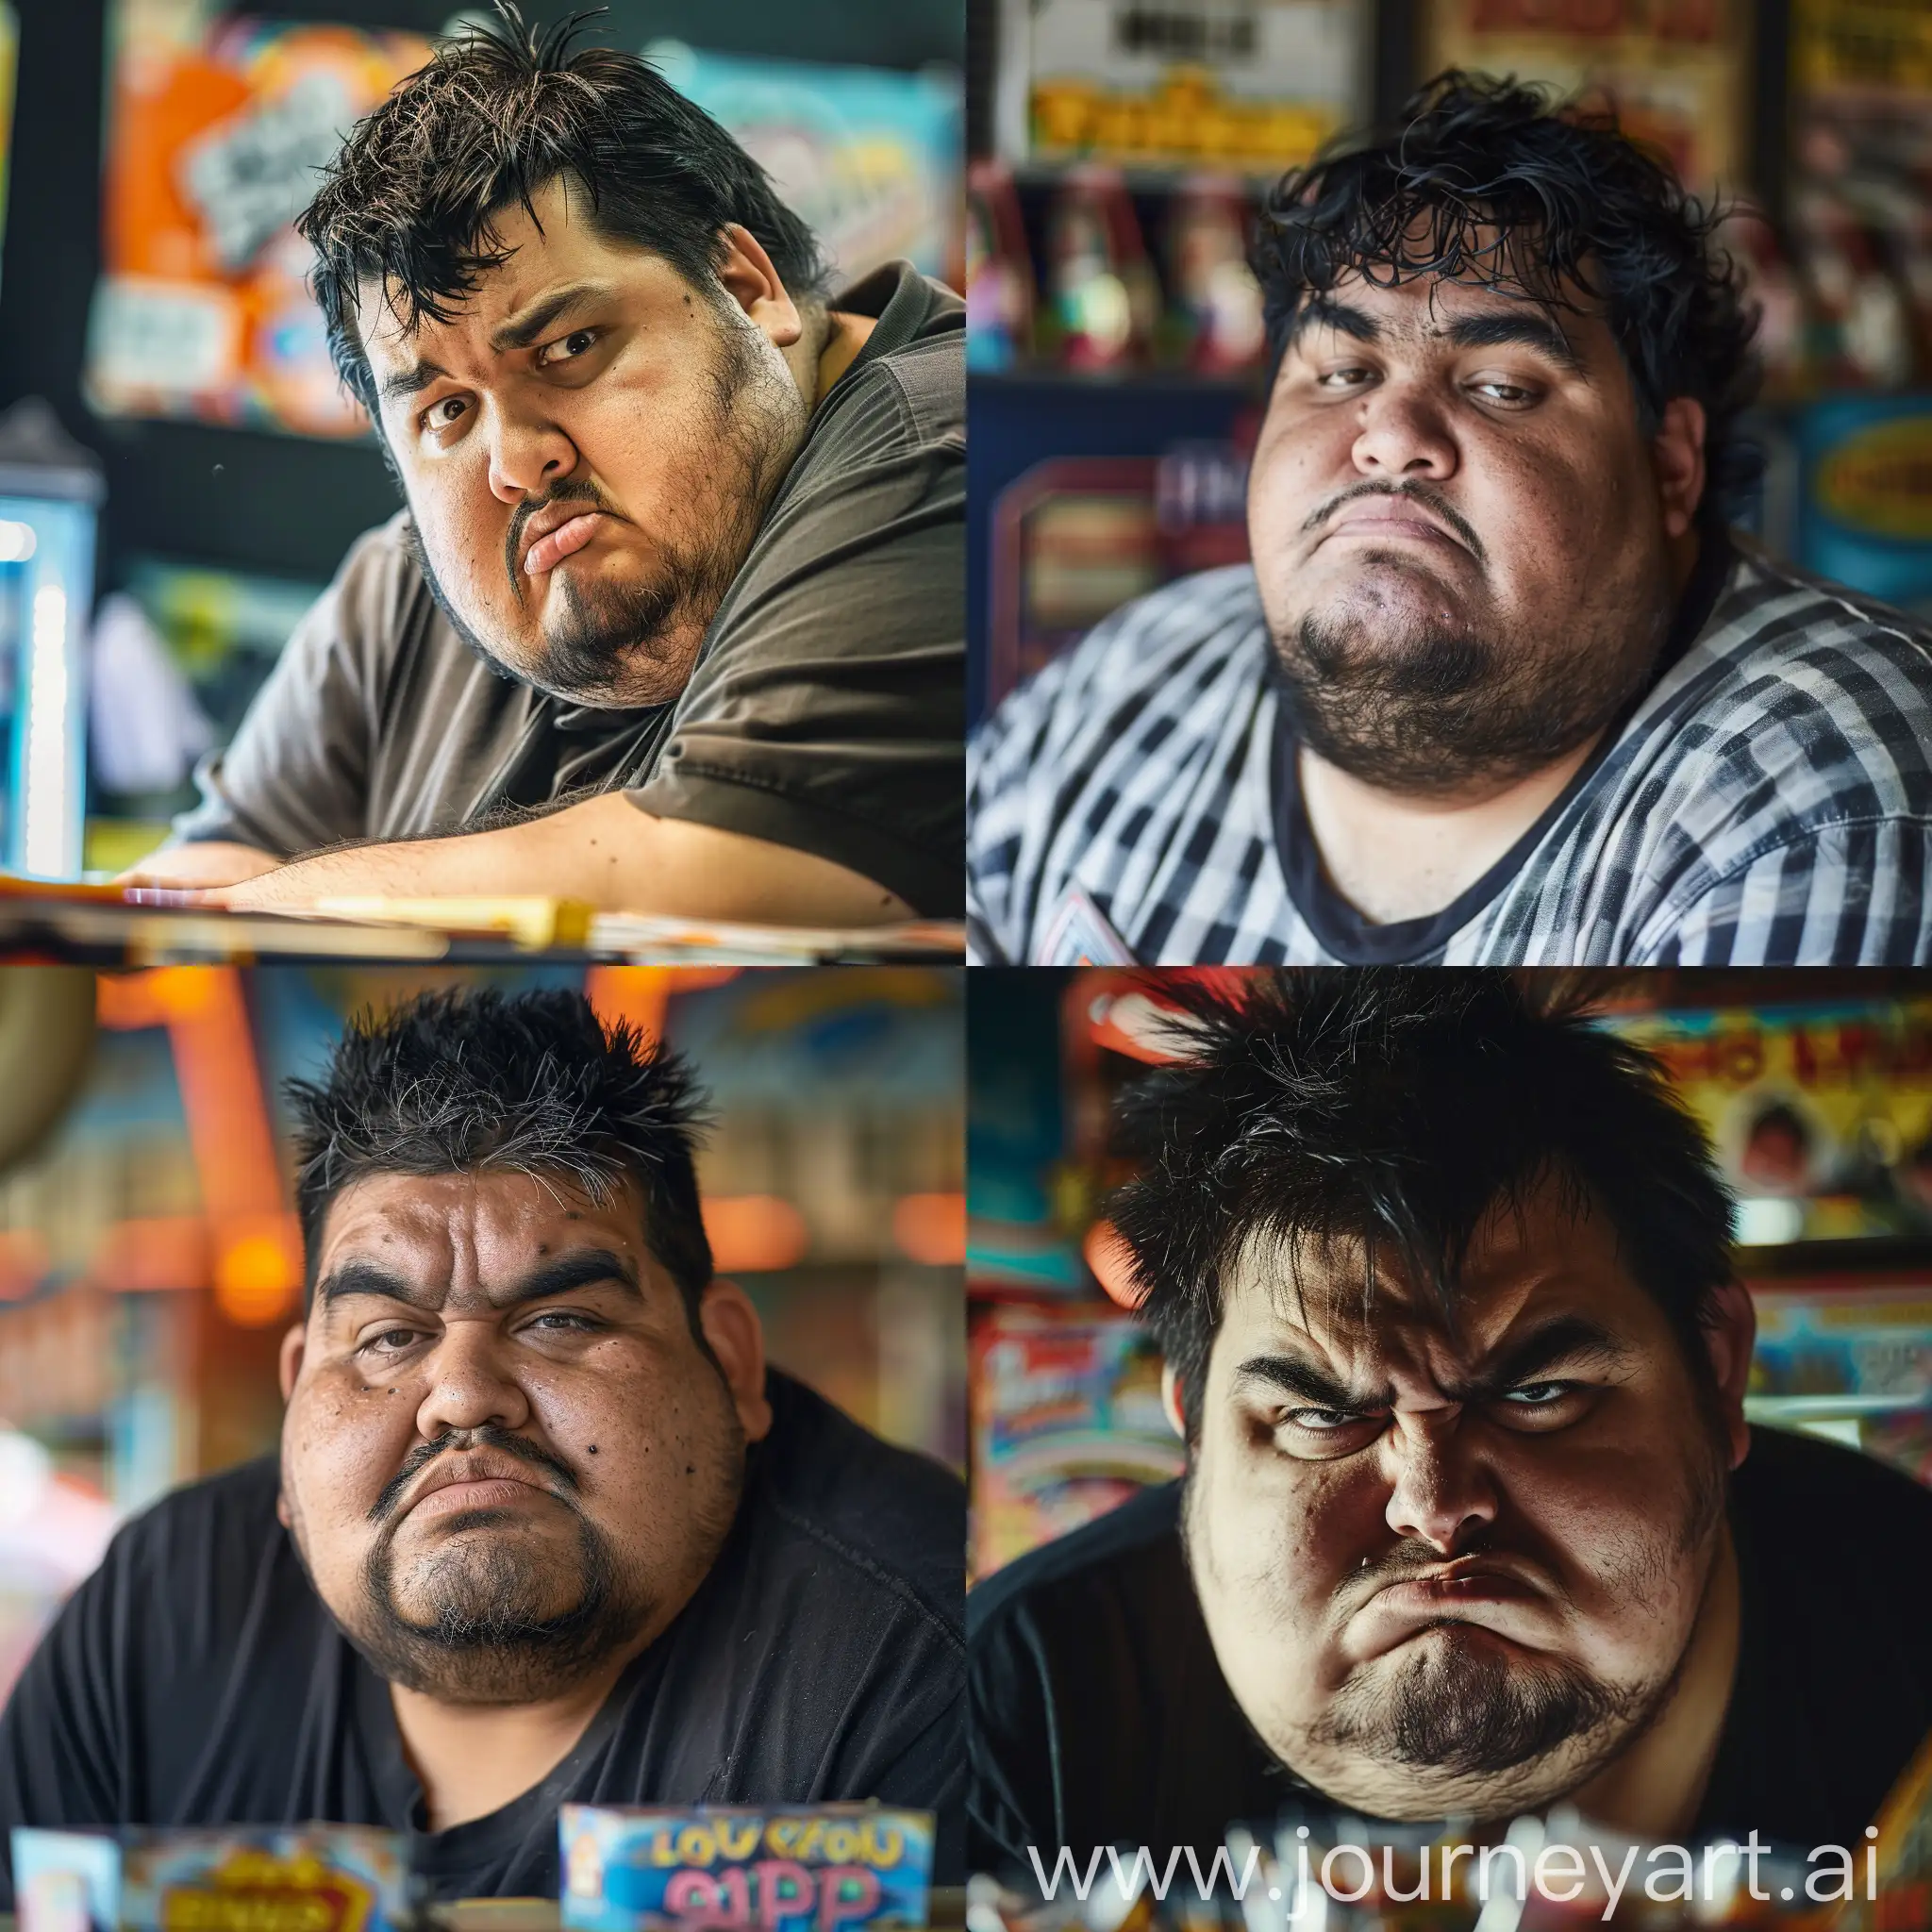 Obese-Man-with-Intense-Gaze-Working-at-Arcade-Prize-Desk